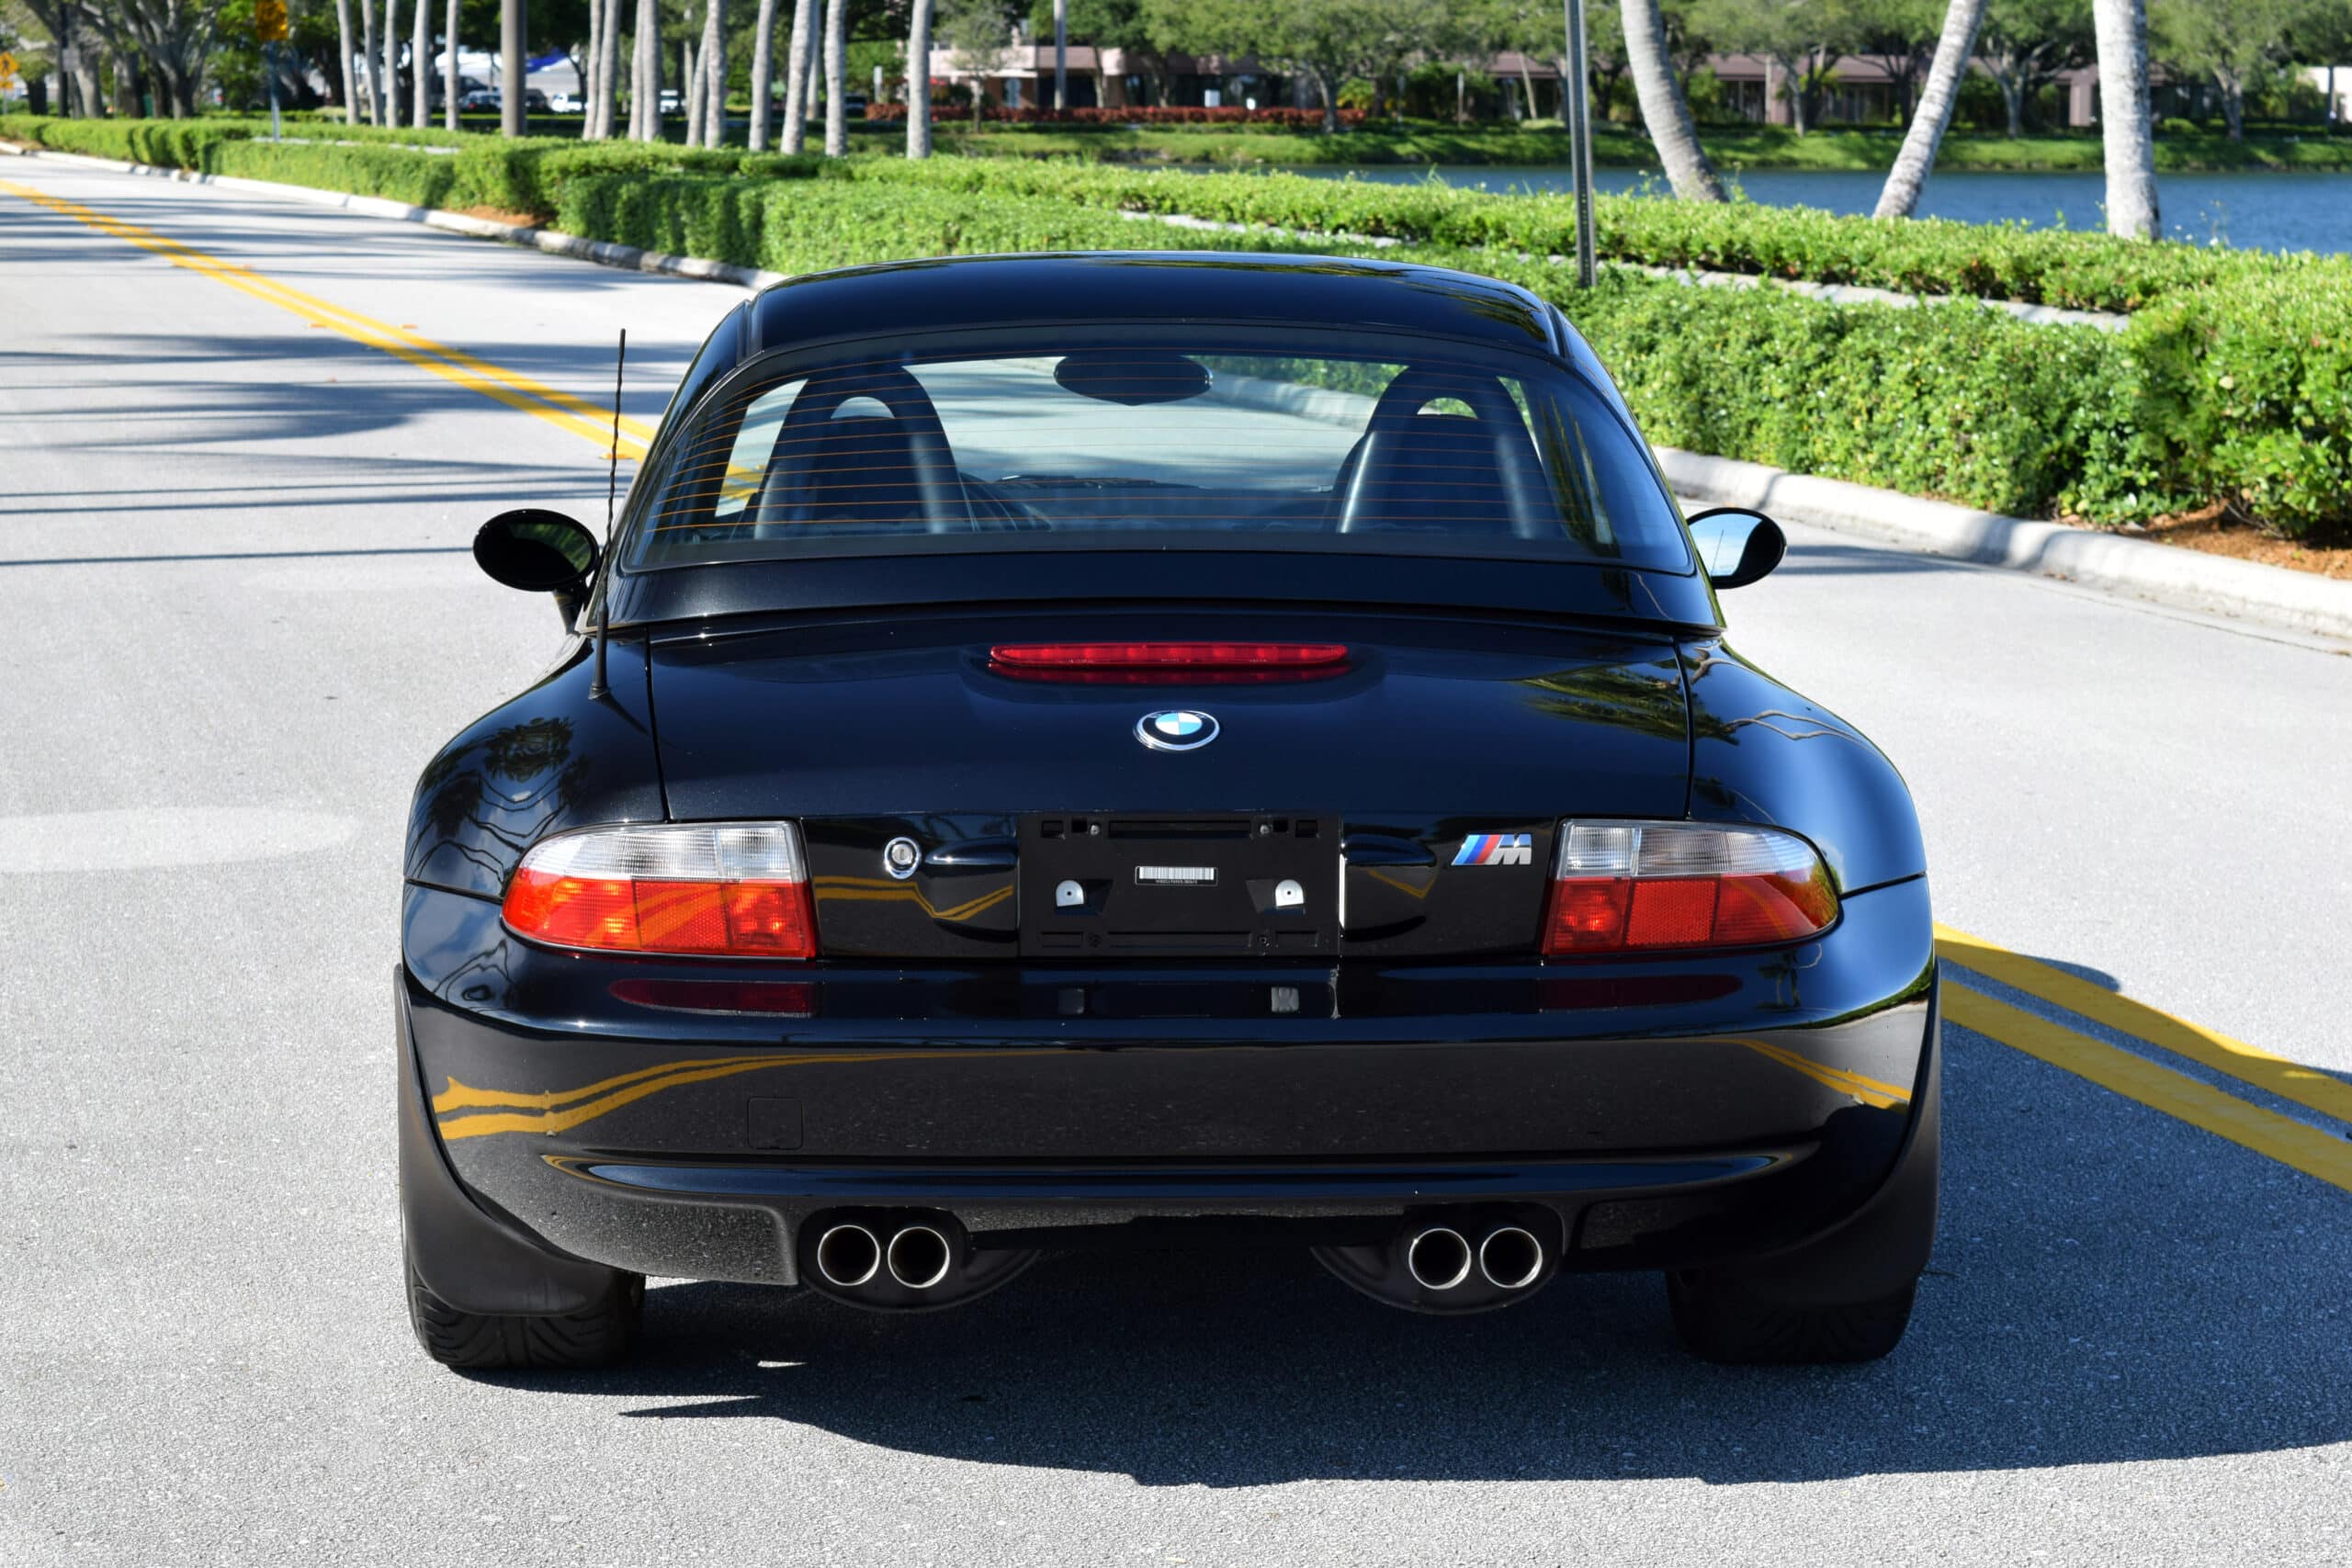 2001 BMW Z3M Roadster, 11K actual miles, S54 Engine, hard top, all original paint, collector grade